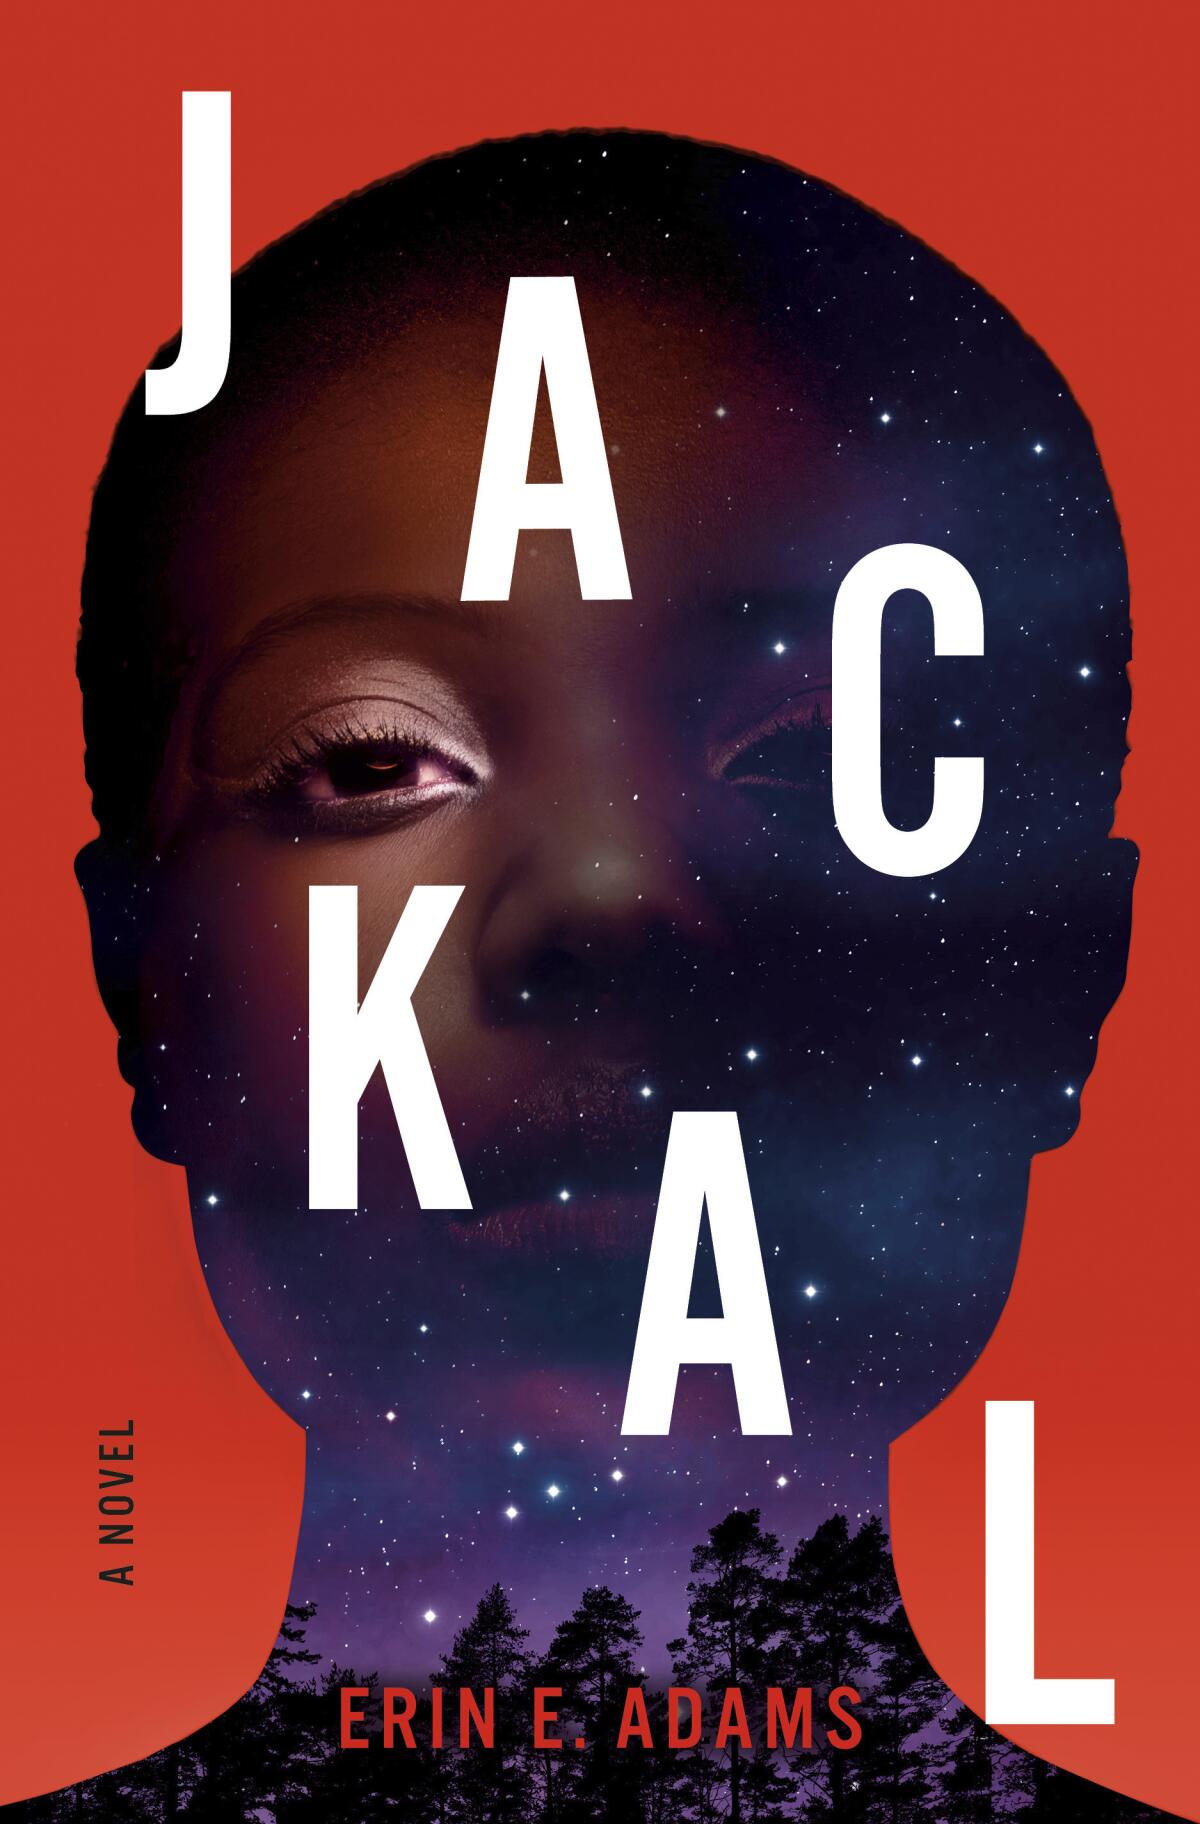 This cover image released by Bantam shows "Jackal" by Erin E. Adams. (Bantam via AP)